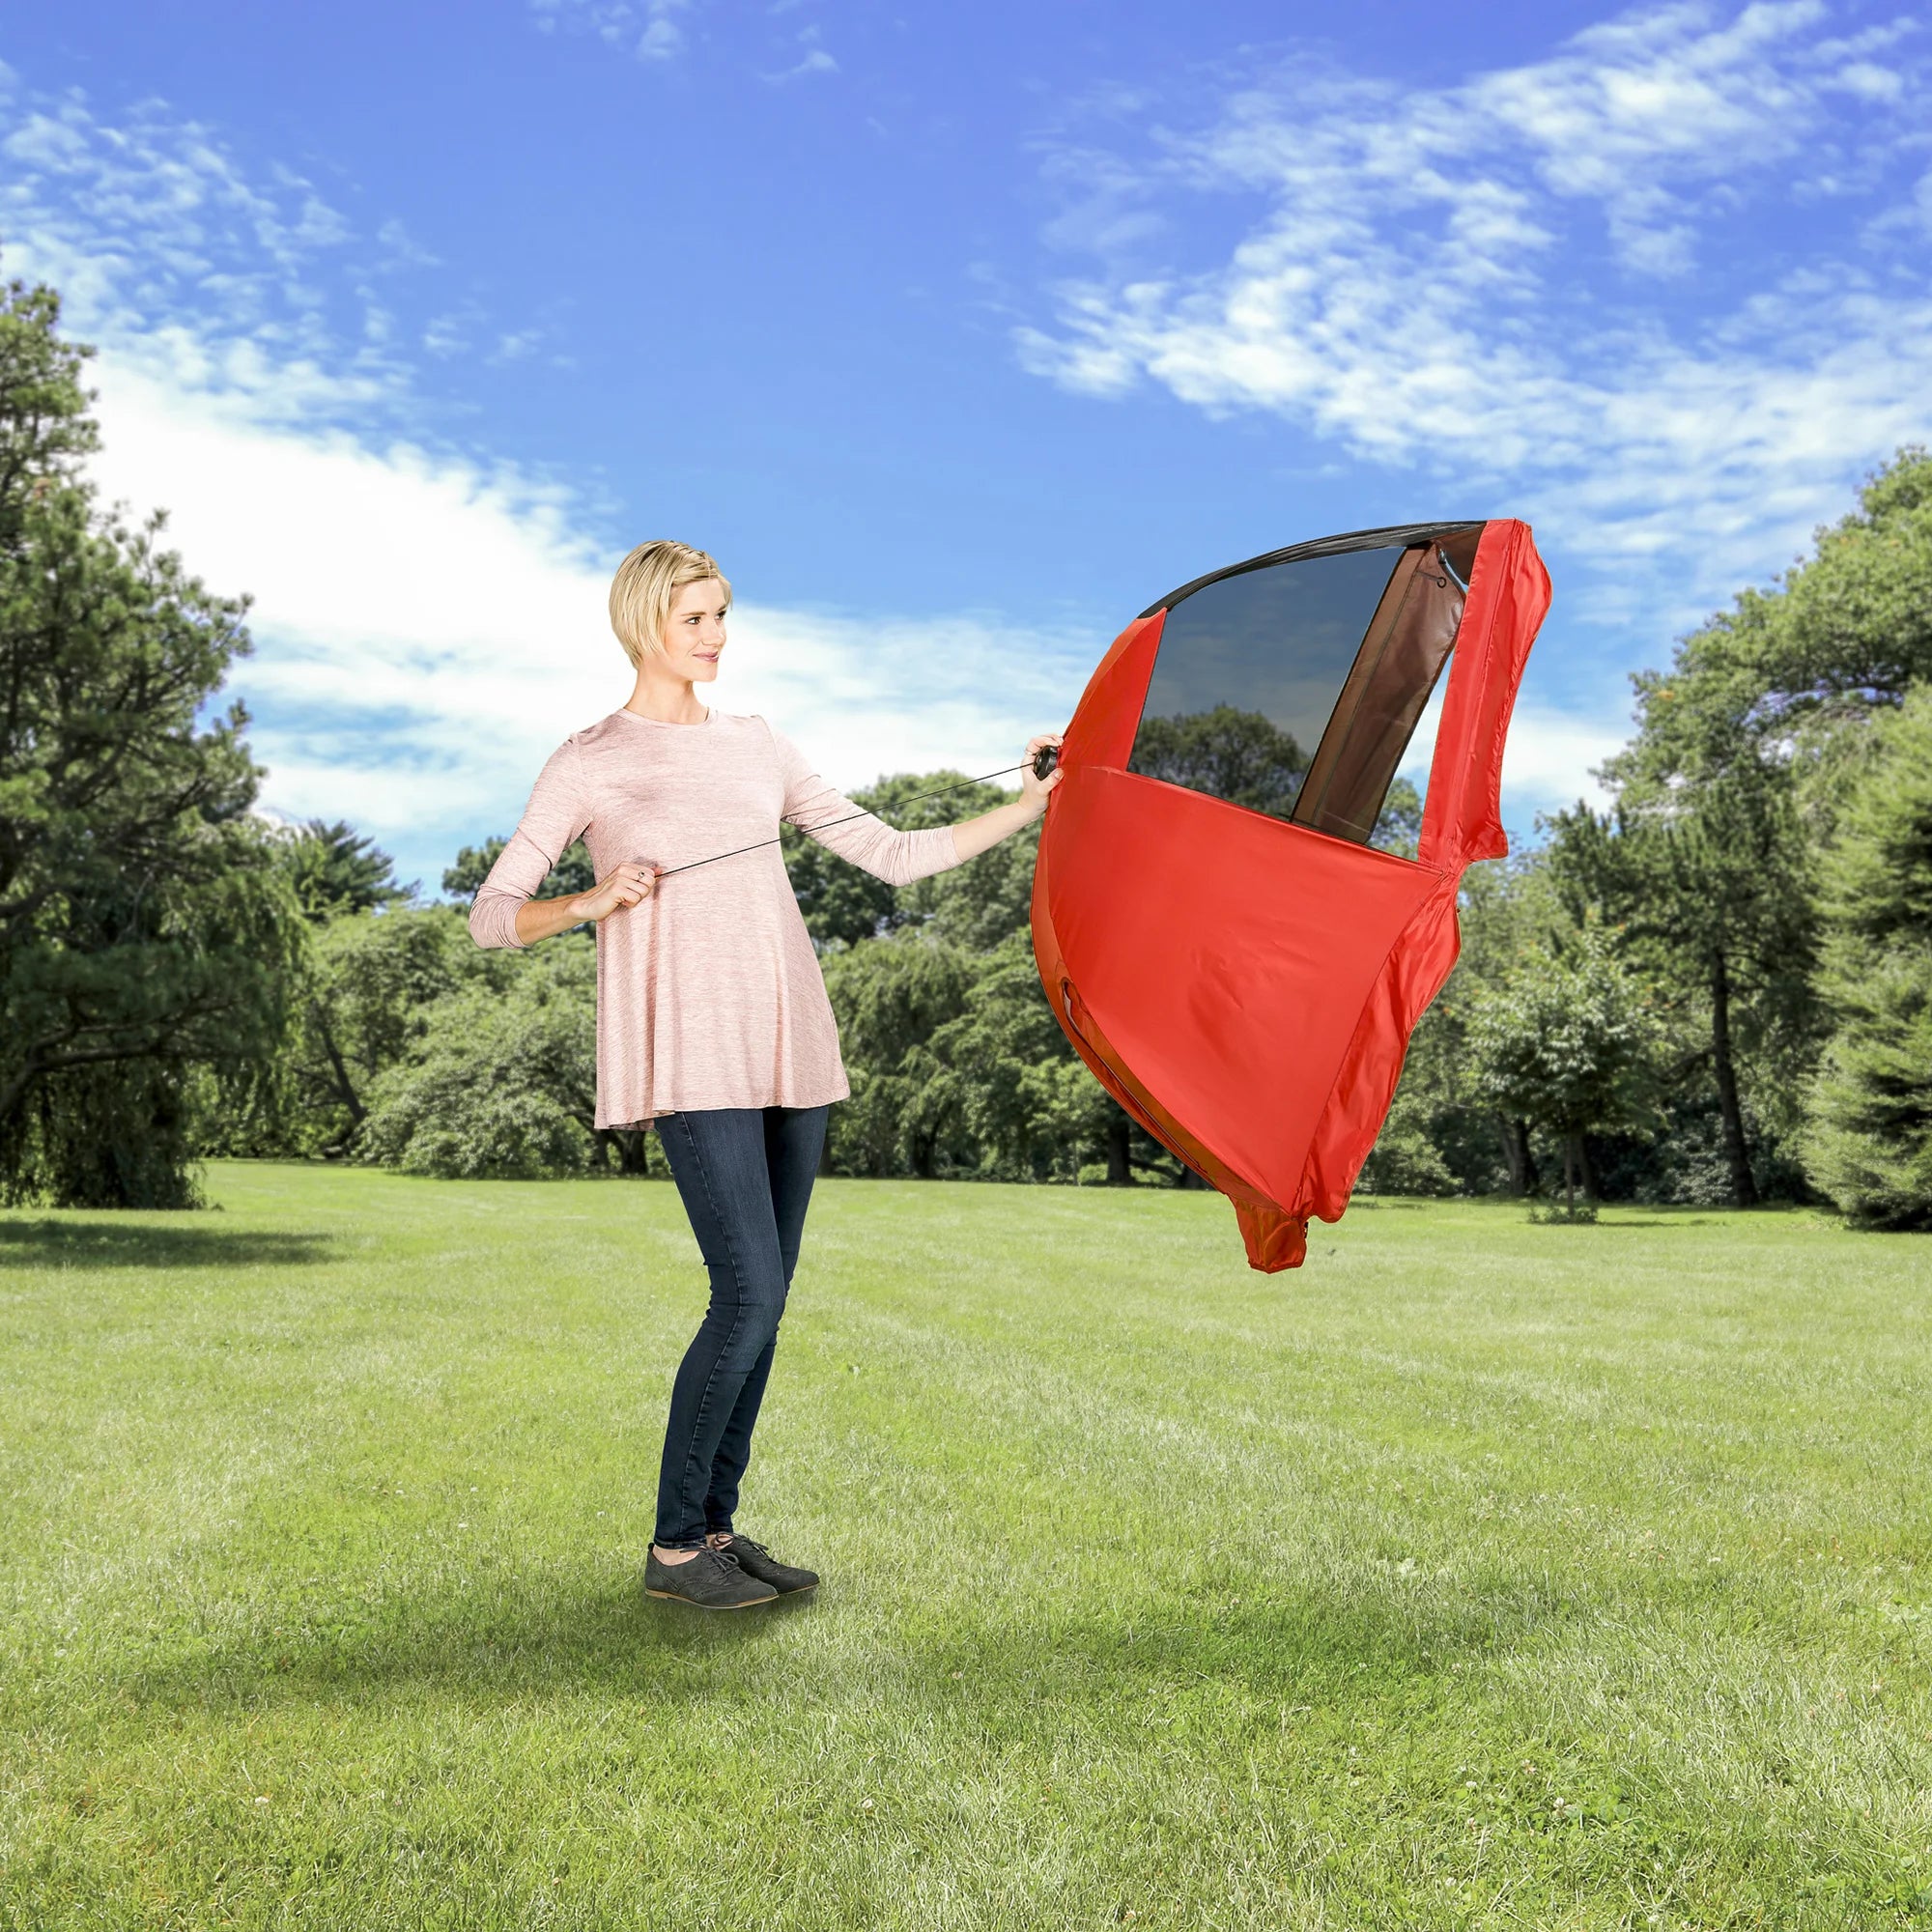 Woman opening the canopy of the Portable Pet Pen while in a park.